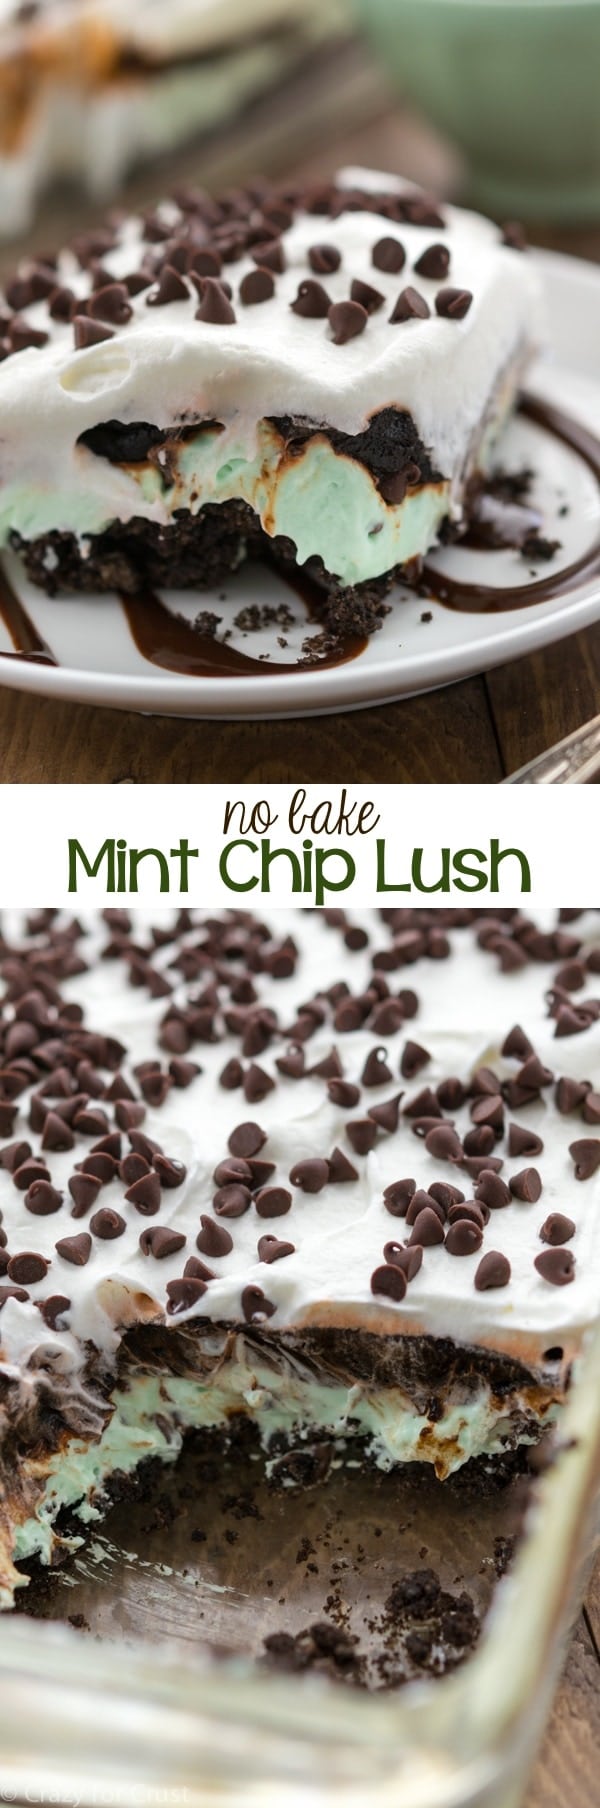 No Bake Mint Chip Lush Dessert filled with layers of cookie crumbs, no bake mint chip cheesecake, and chocolate pudding!